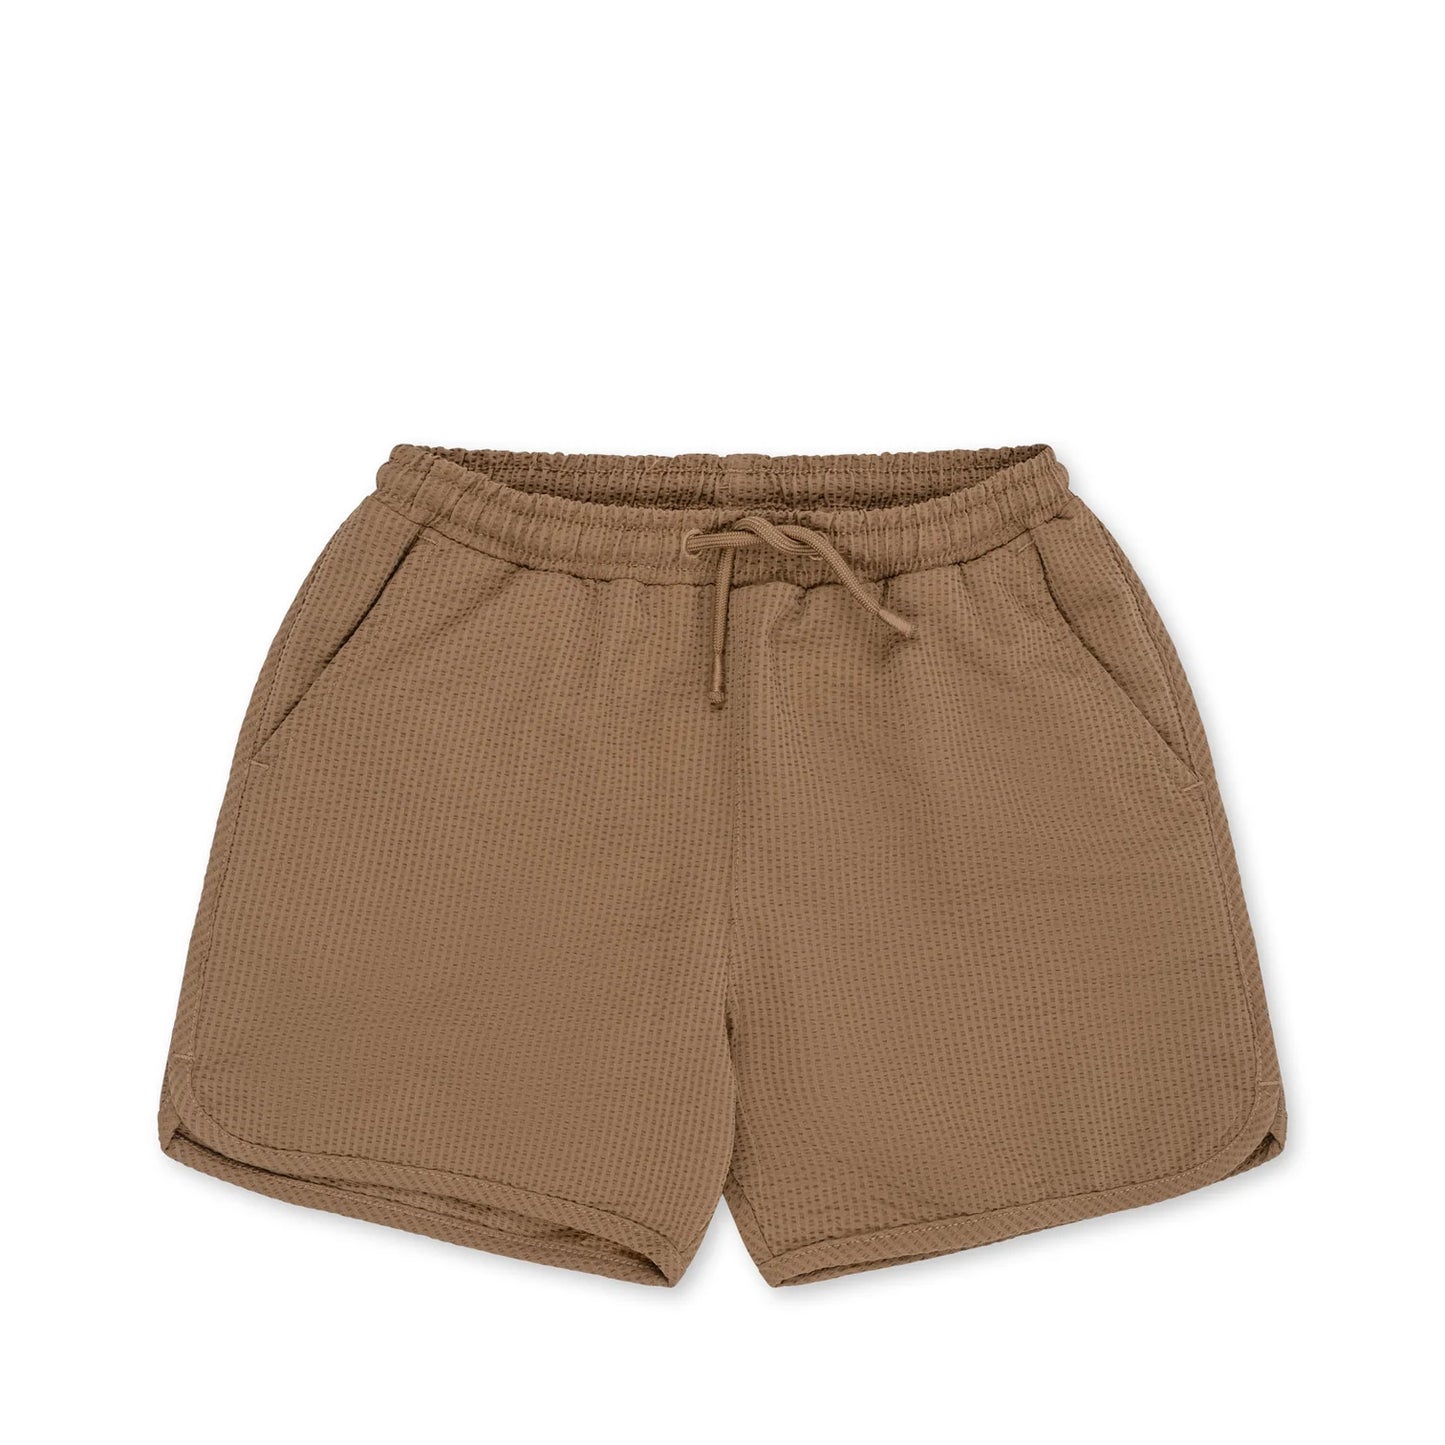 seer asnou swimshorts - toasted coconut